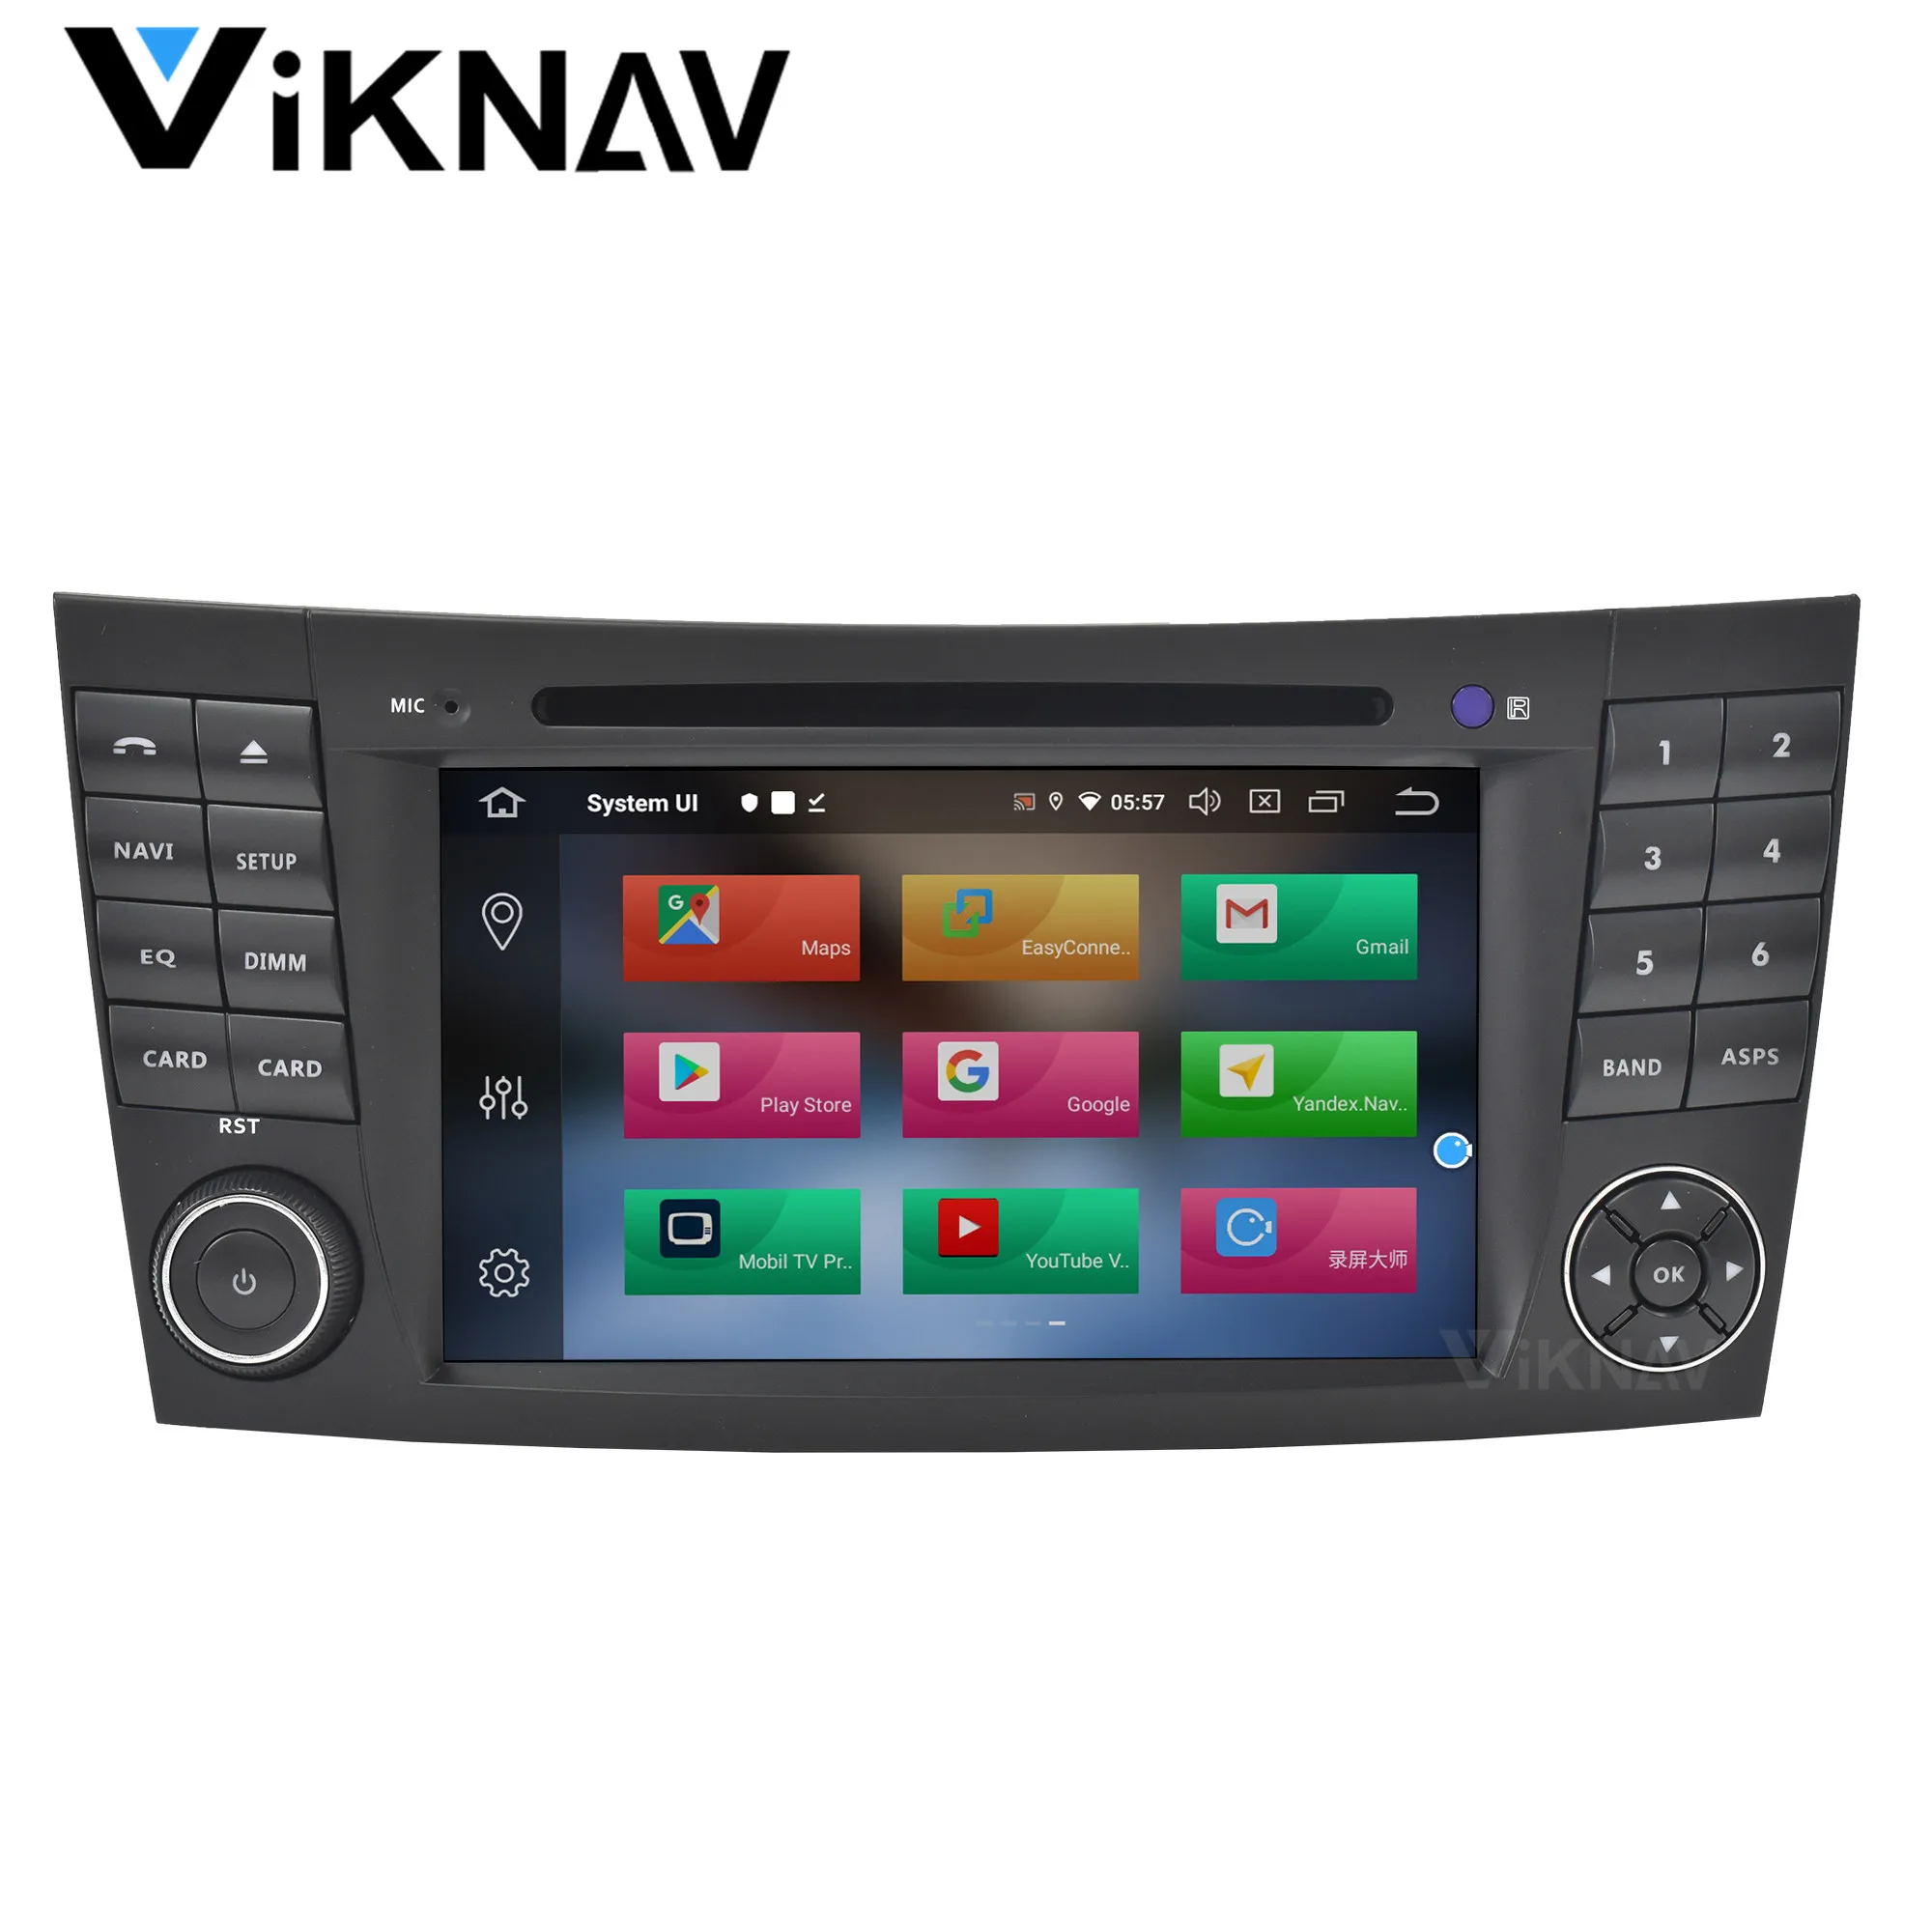 

2 DIN Android 10 Car radio For Mercedes Benz E-Class W211 CLK G-Class W463 CLS W219 2002-2009 car auto stereo GPS navigation